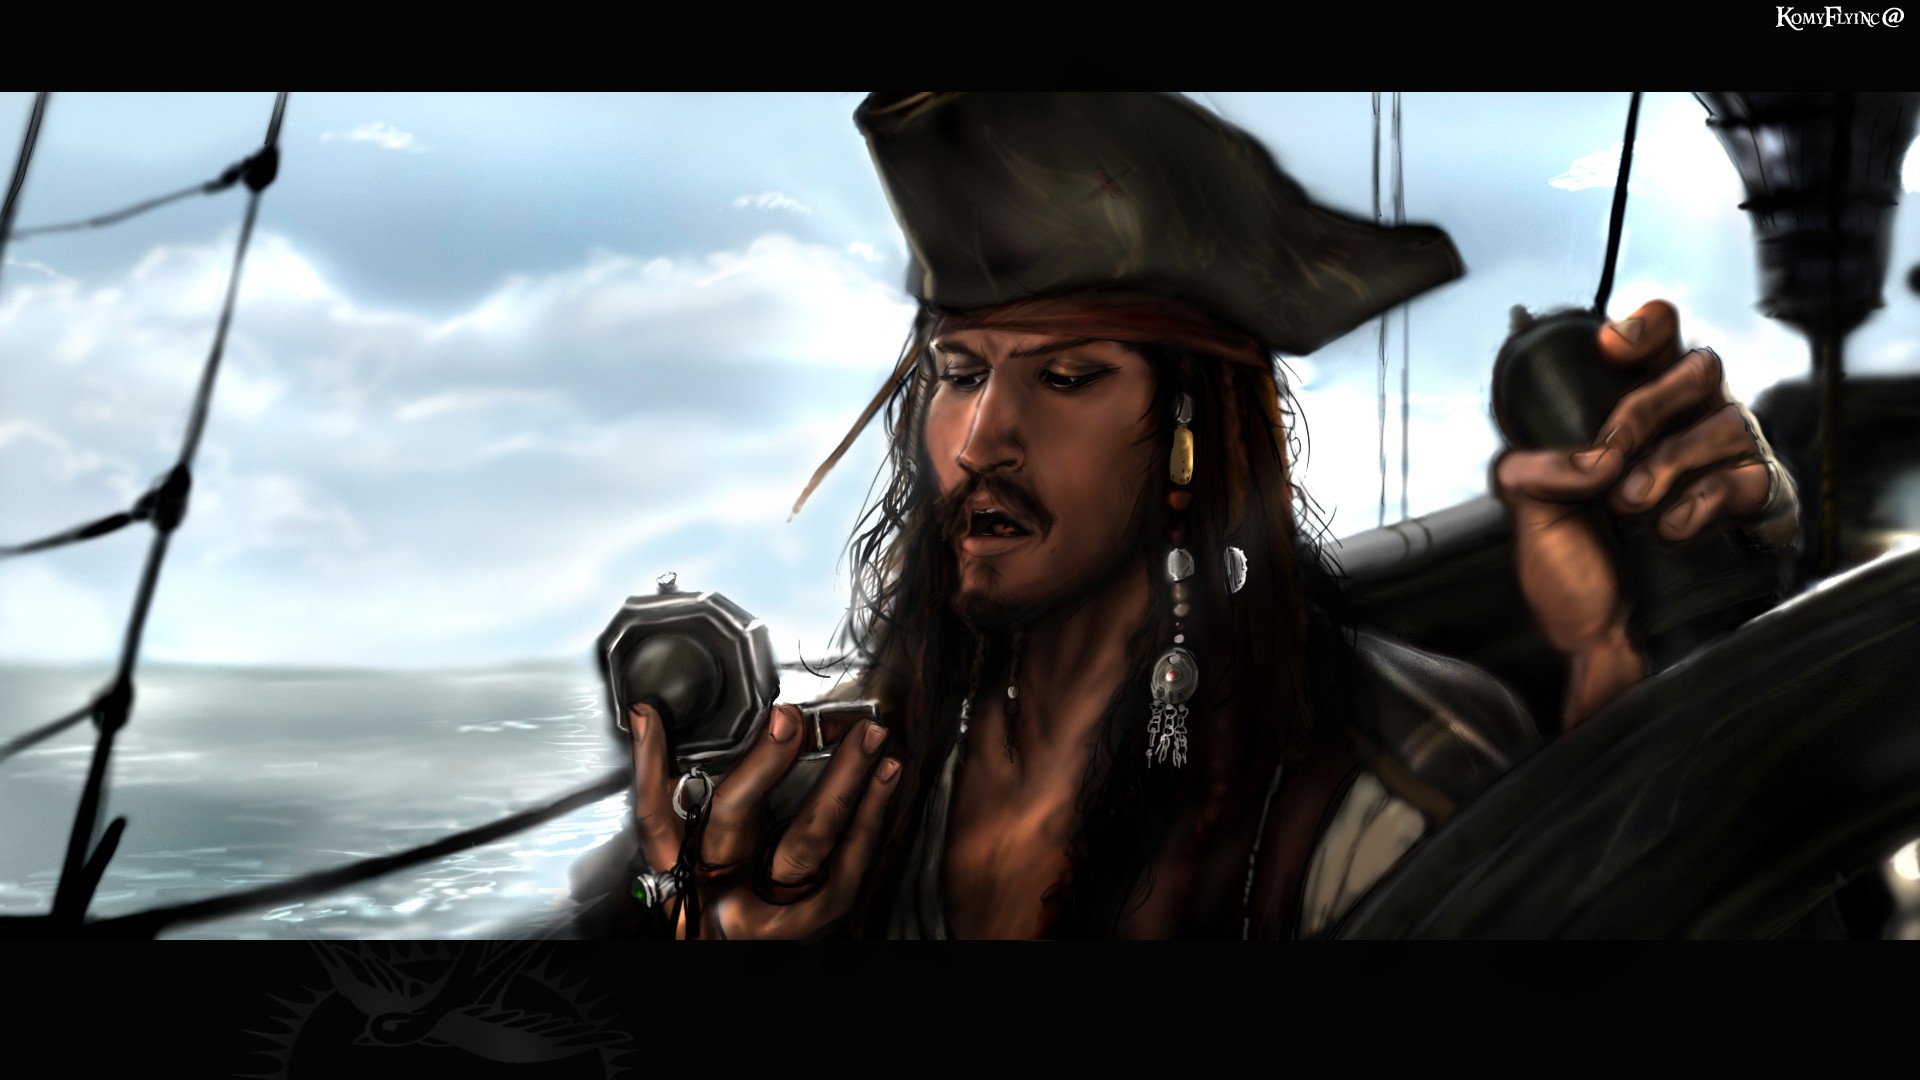 Pirates Of The Caribbean Jack Sparrow Pirate Hd Wallpaper Art And Paintings Wallpaper Better